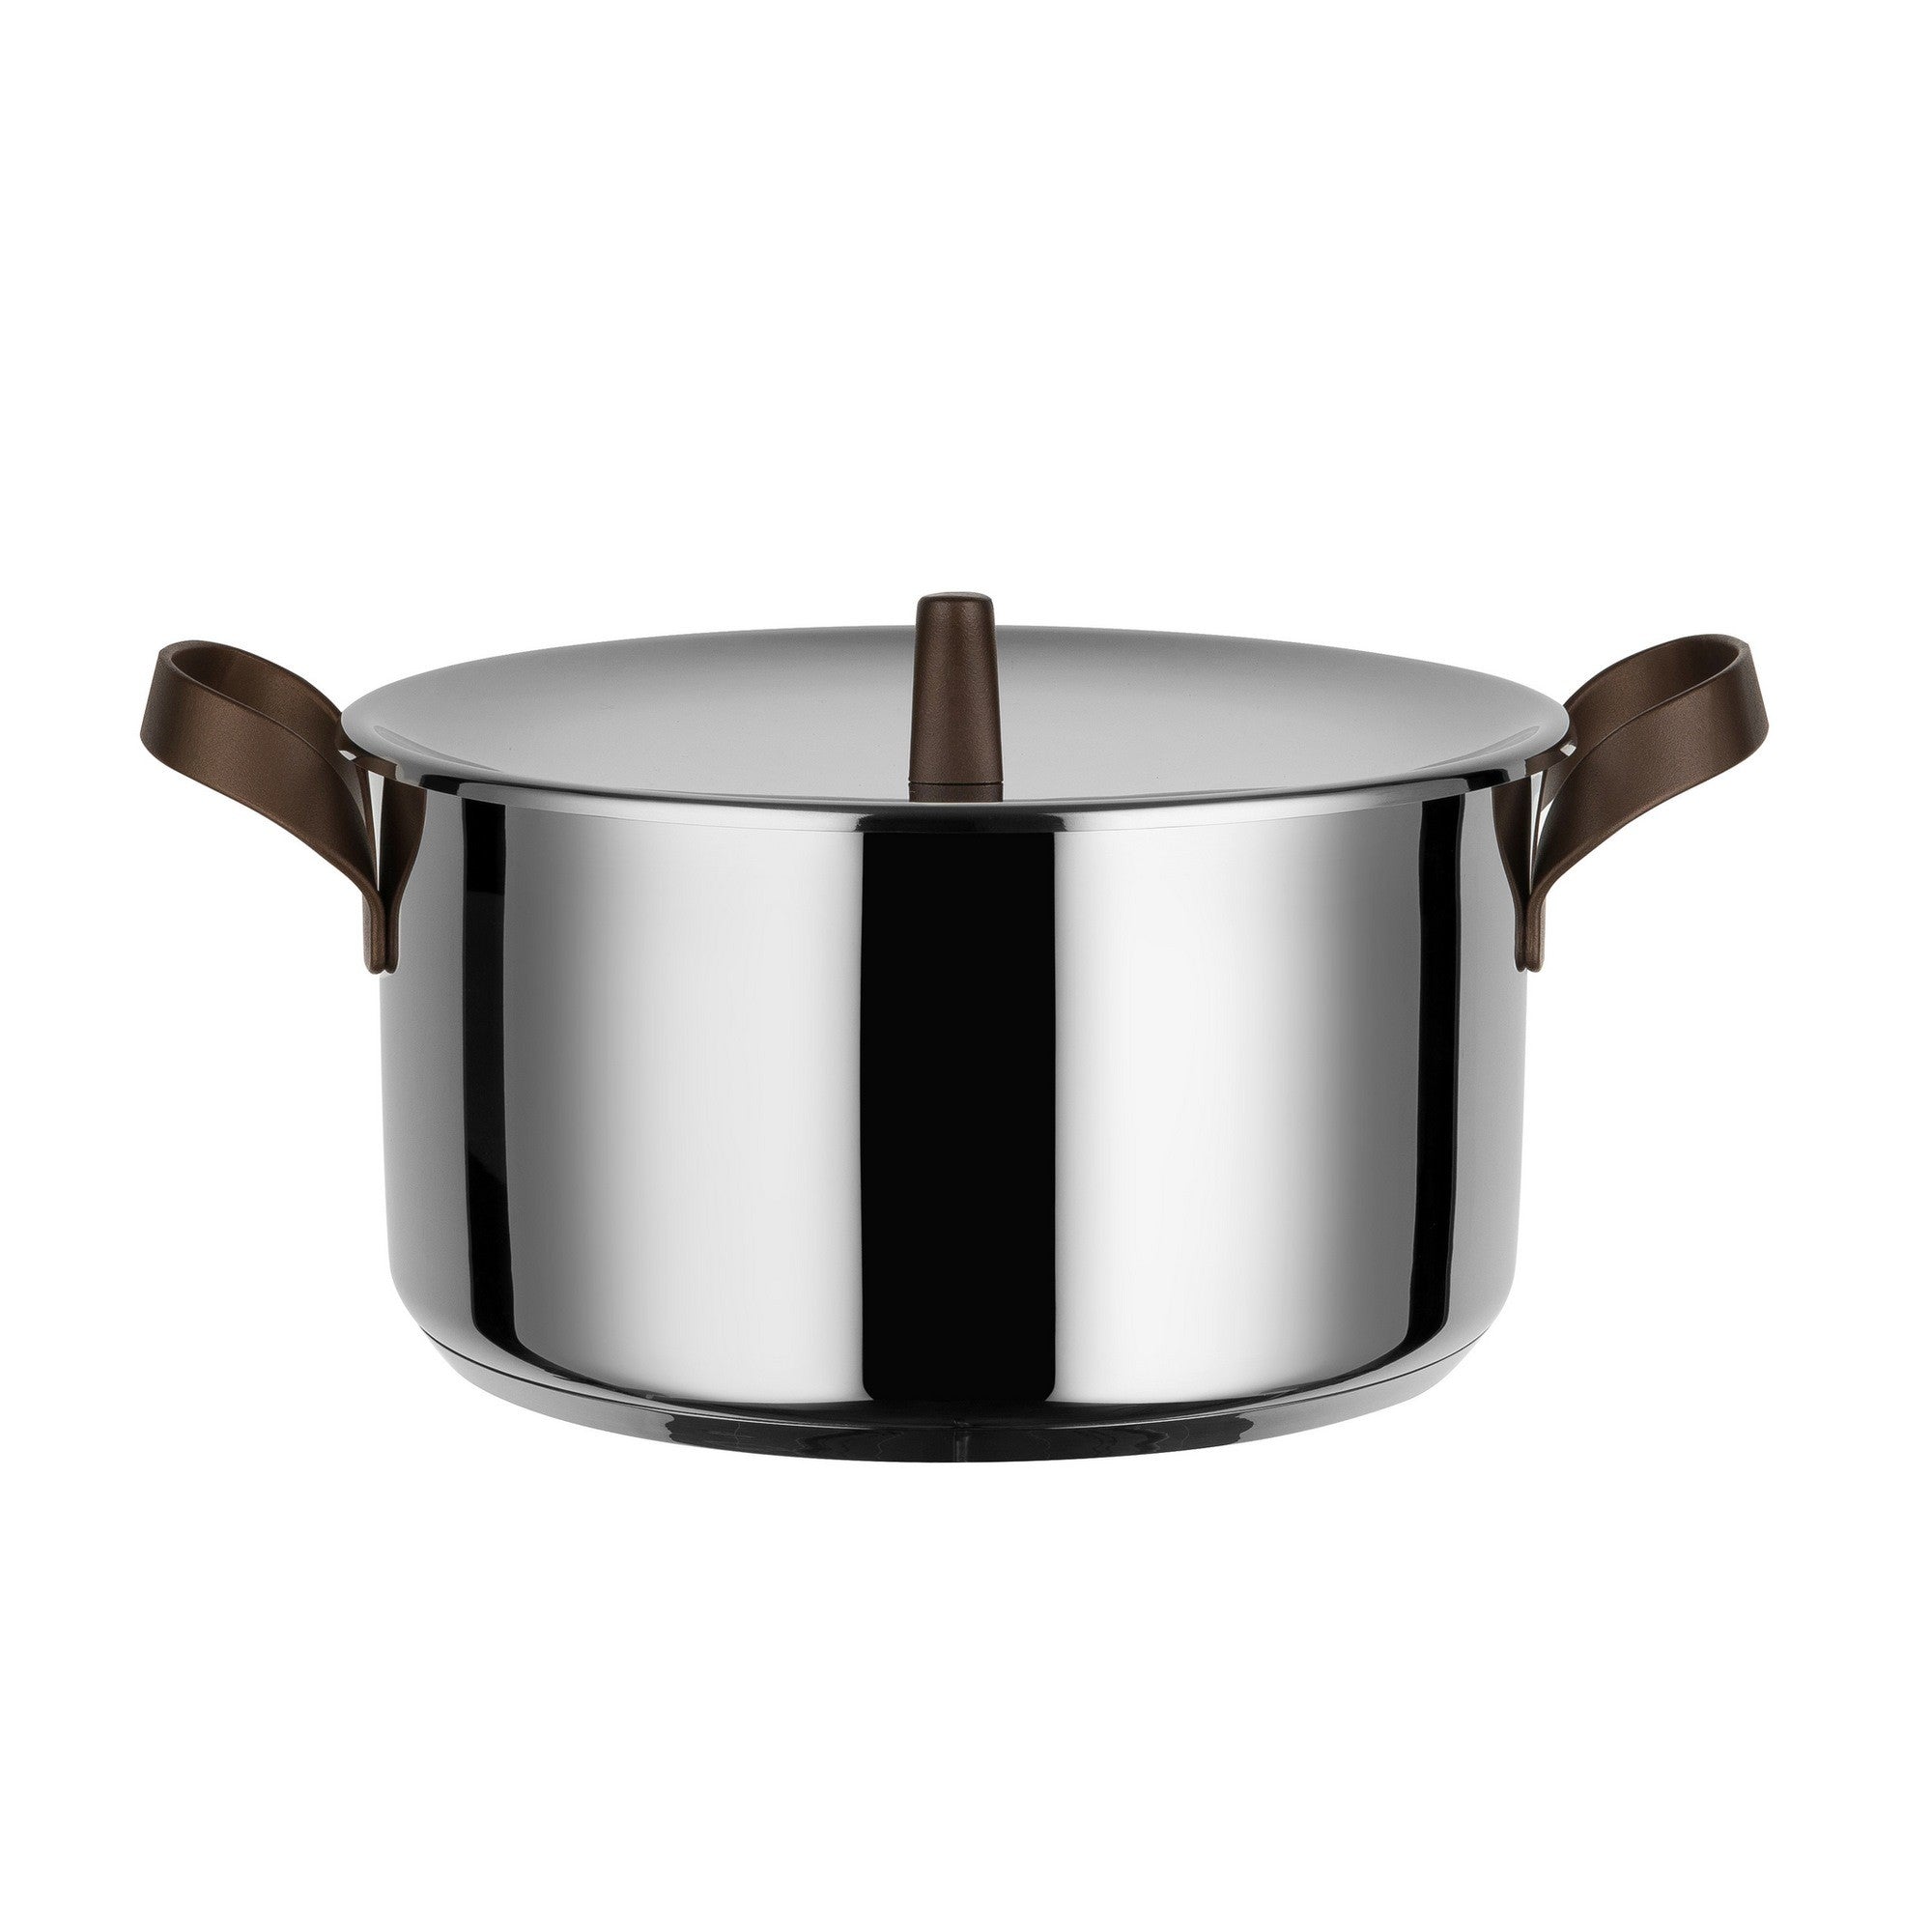 Alessi Edo Saucepan with two handles in 18/10 Stainless Steel, cm 24